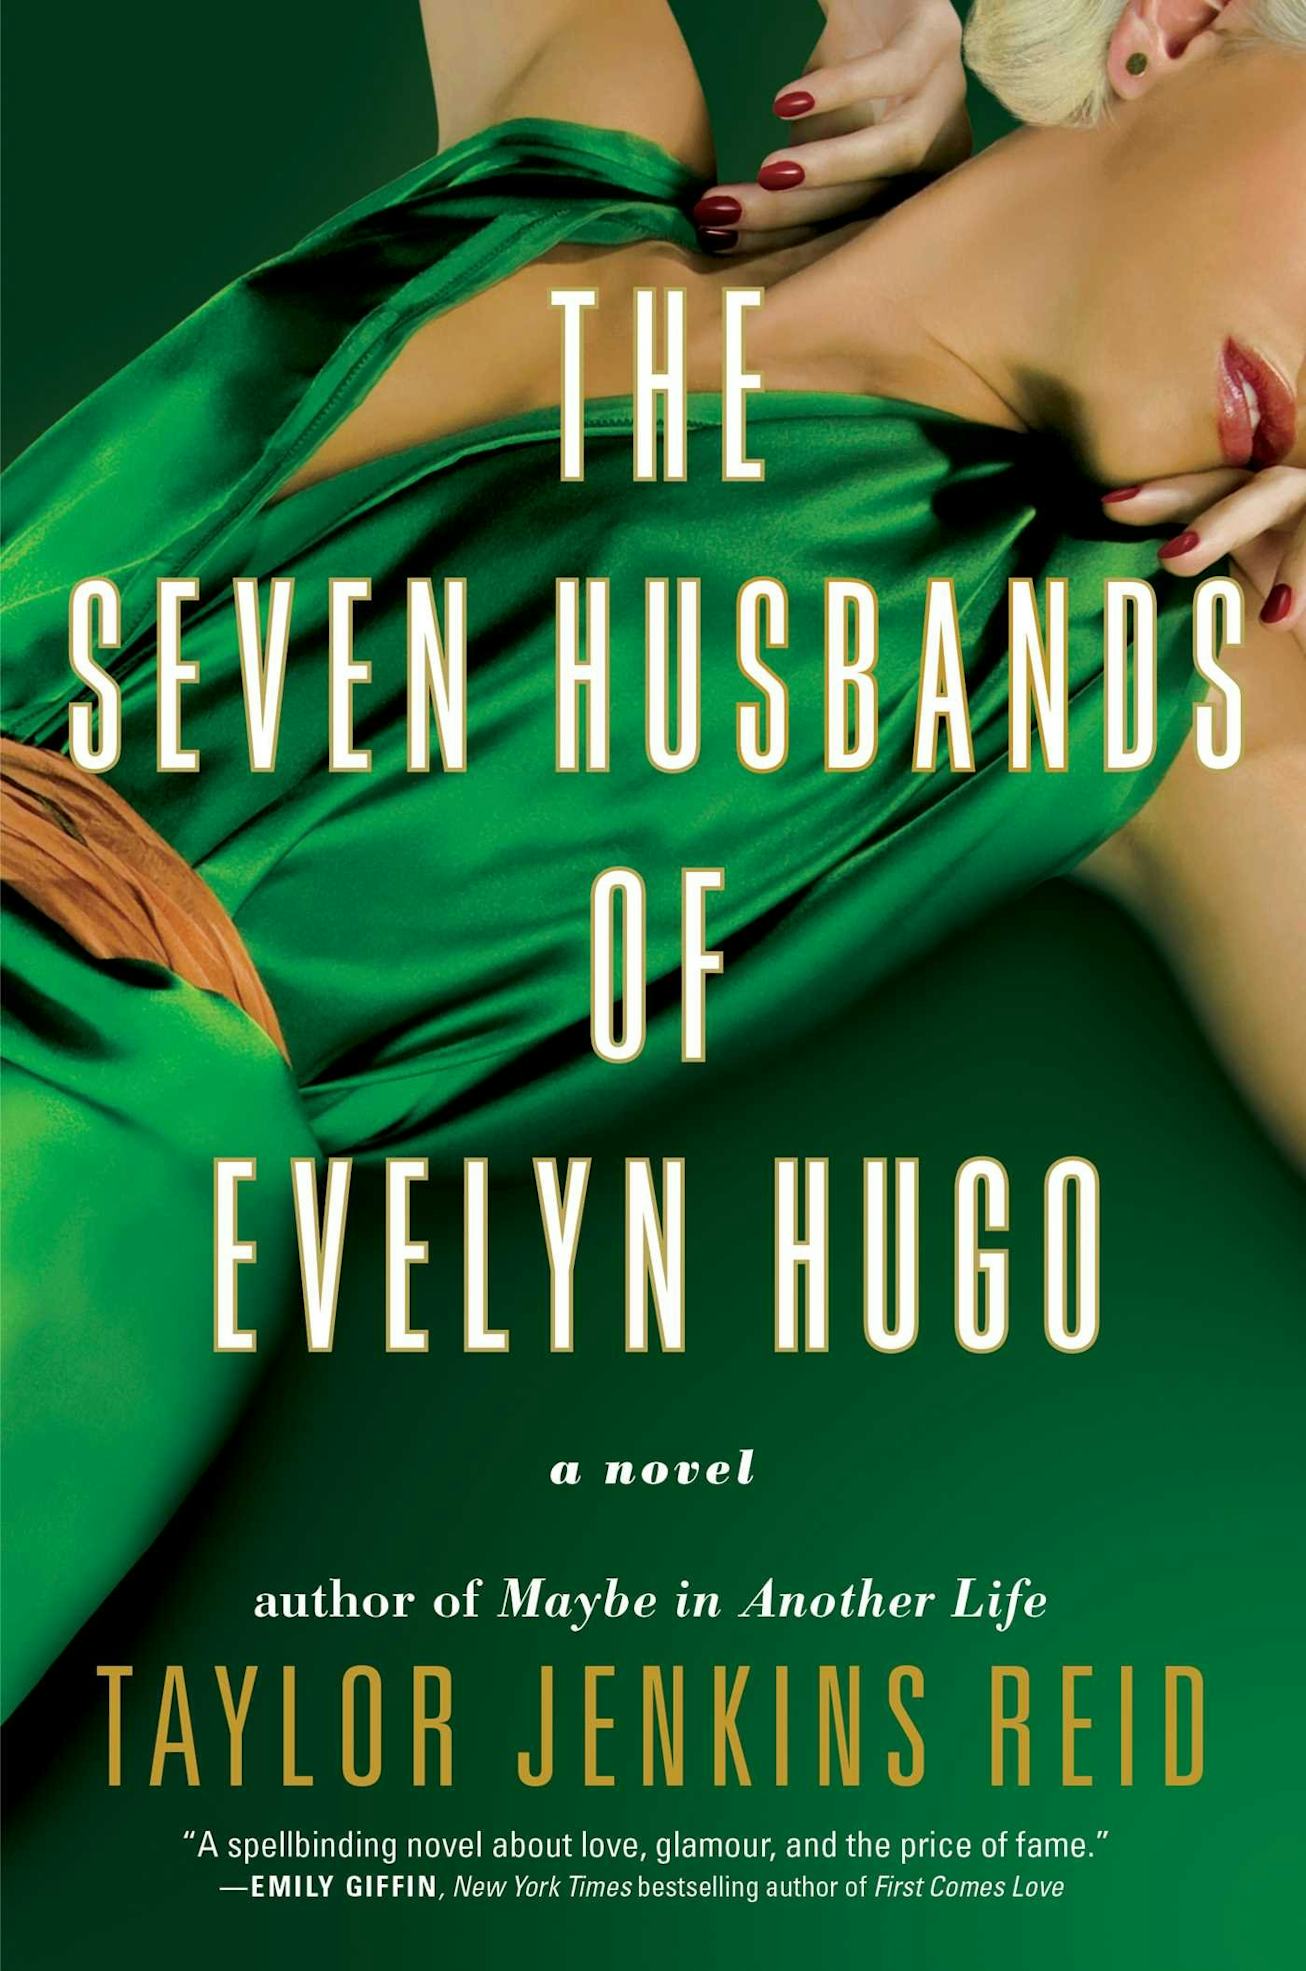 The Seven Husbands Of Evelyn Hugo will be adapted into a film for Netflix